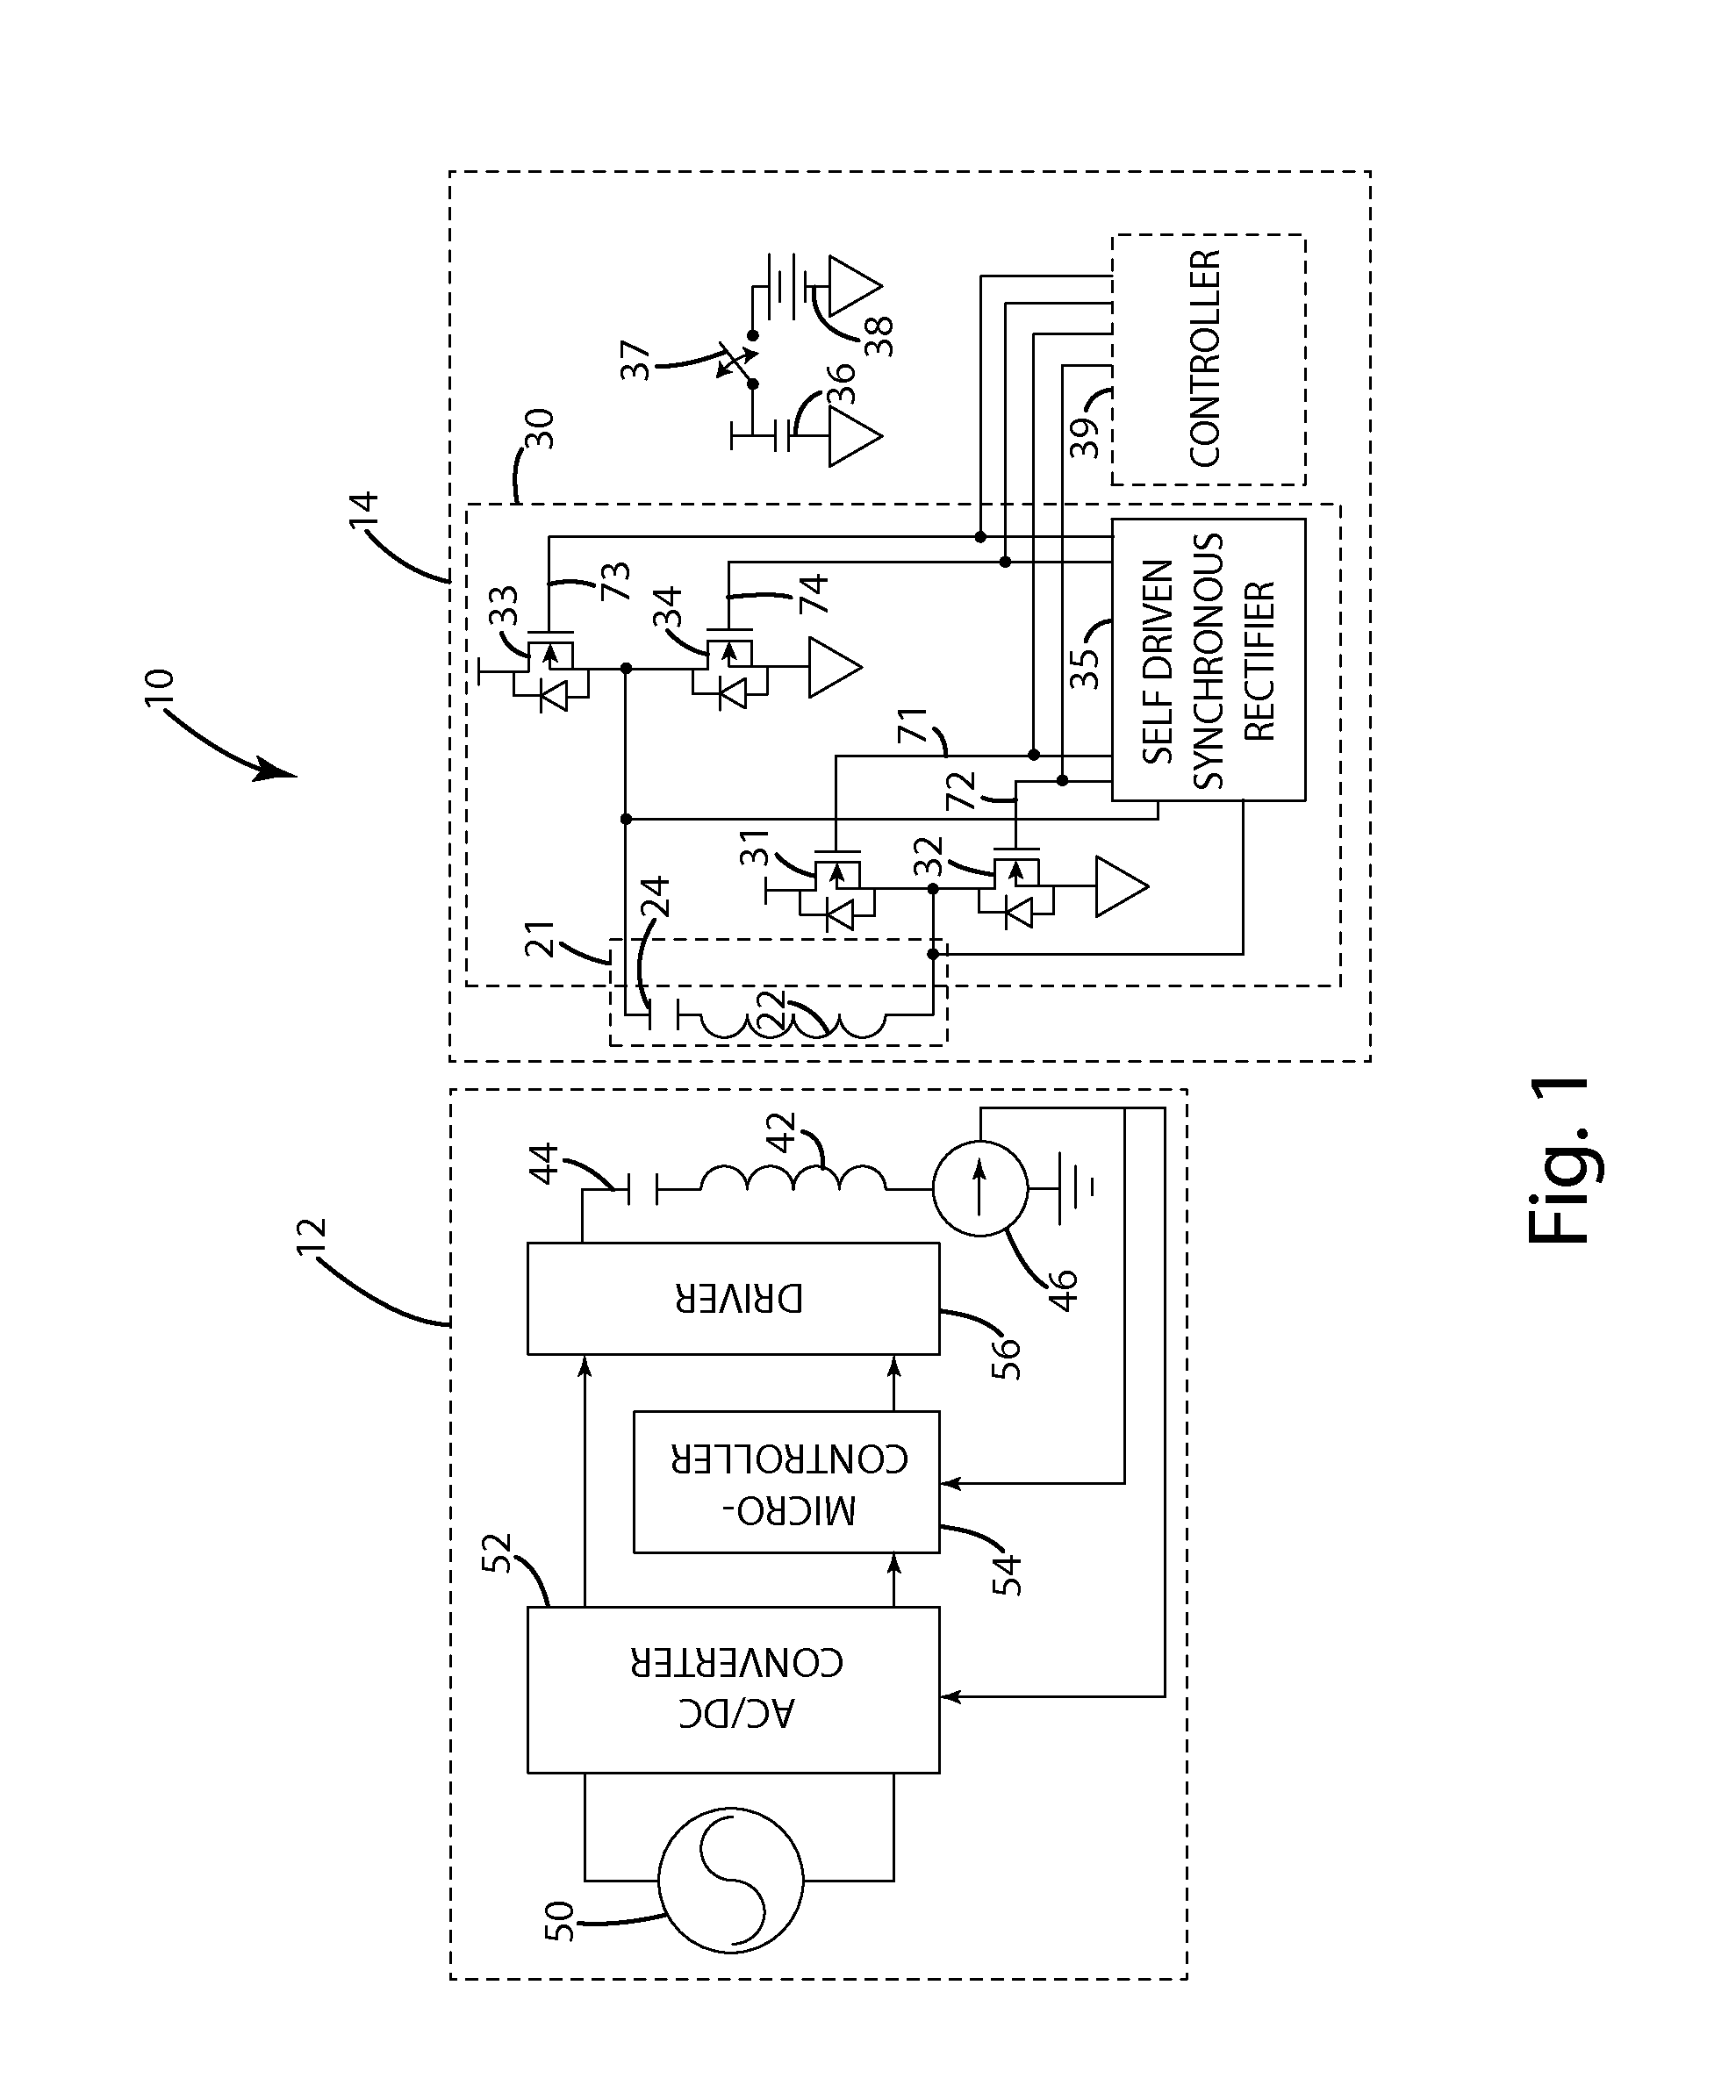 System and method for bidirectional wireless power transfer